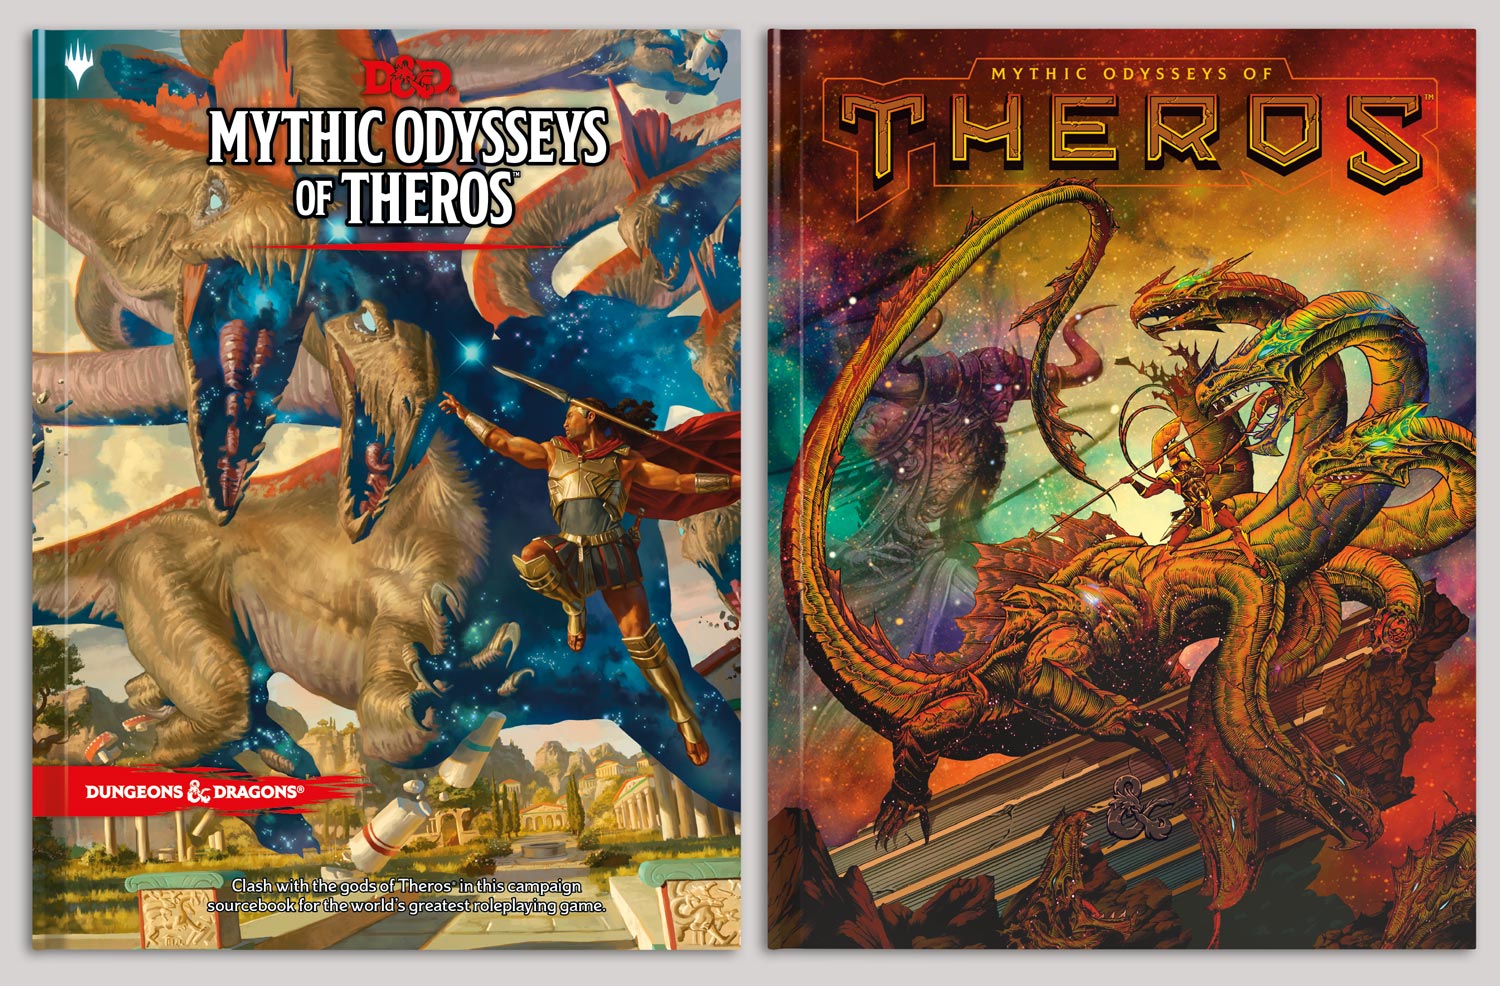 Dungeons & Dragons Mythic Odysseys of Theros for sale online d&d Campaign Setting and Adventure Book by Wizards RPG Team 2020, Hardcover 